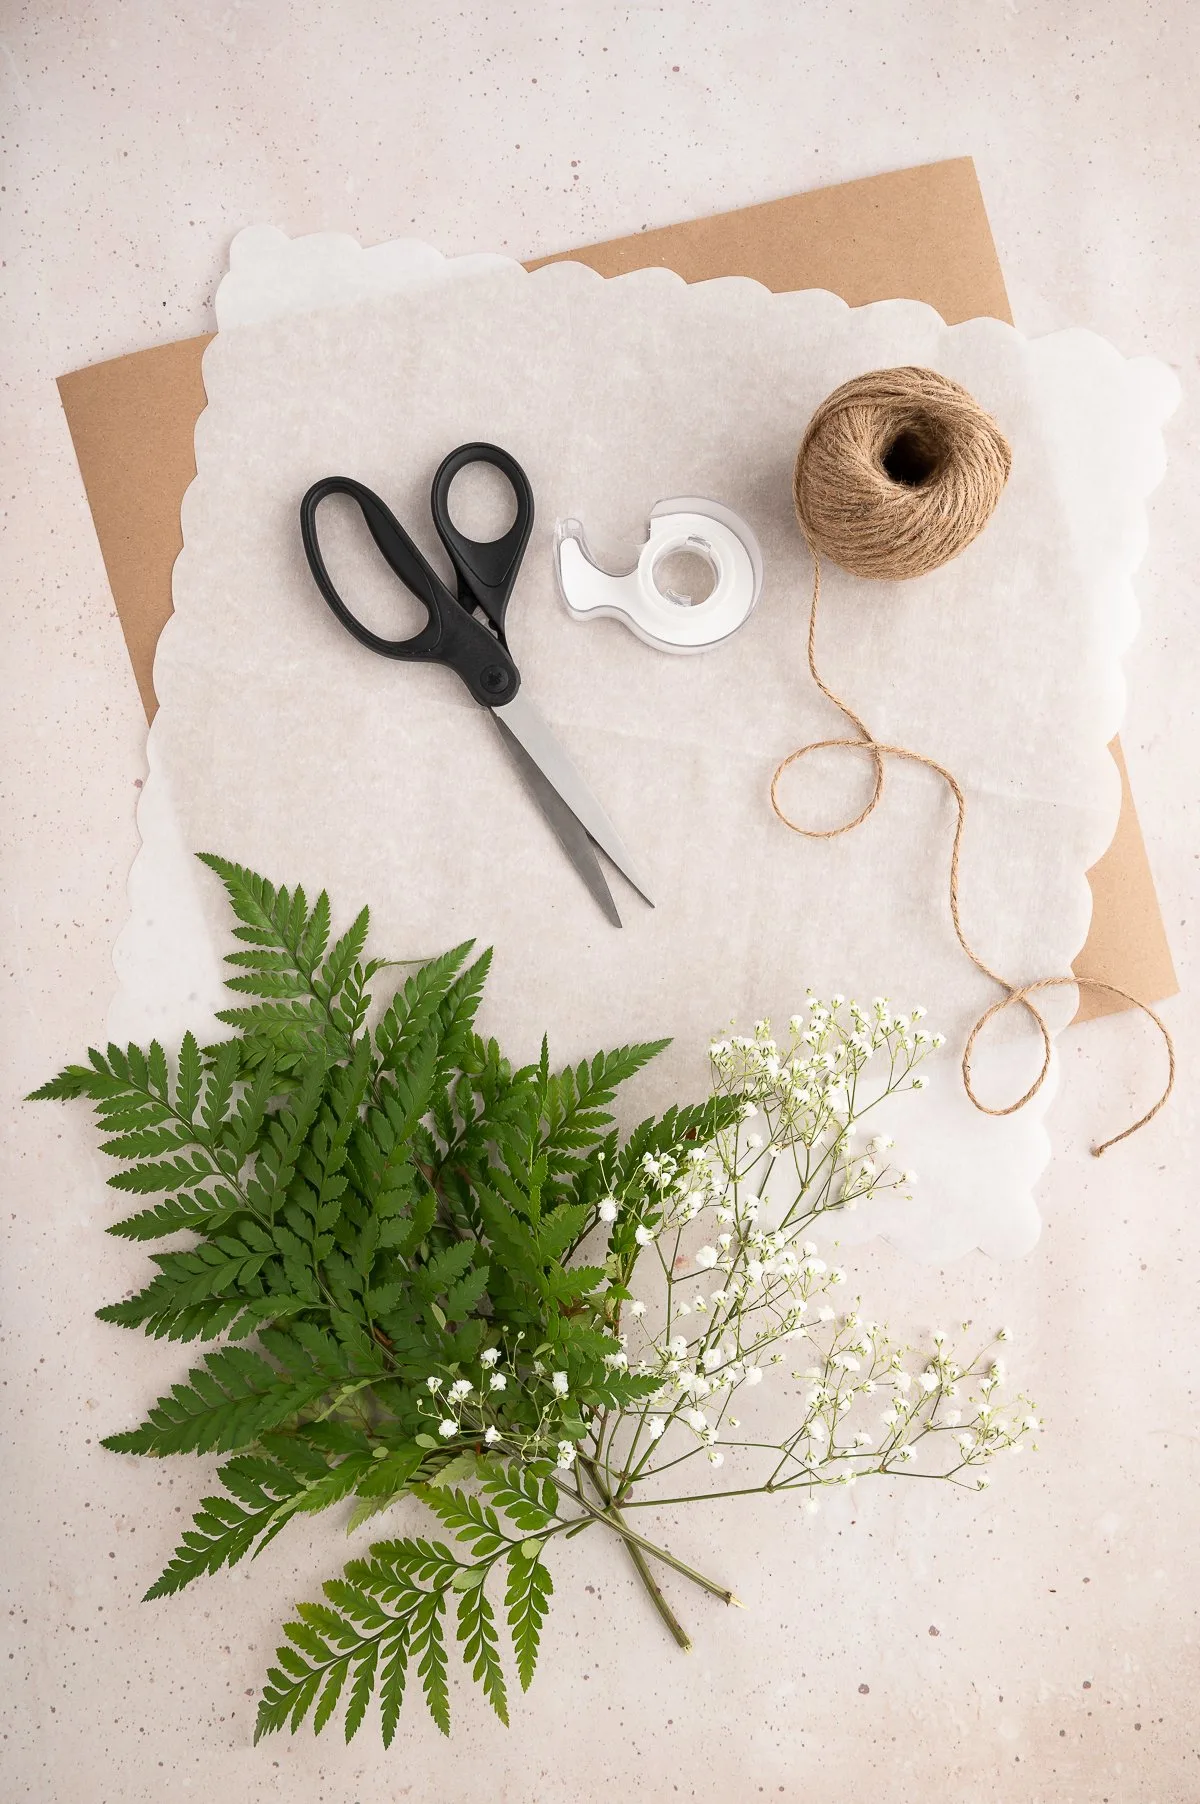 supplies needed to make an edible bouquet including scissors, twine, ferns and baby's breath.